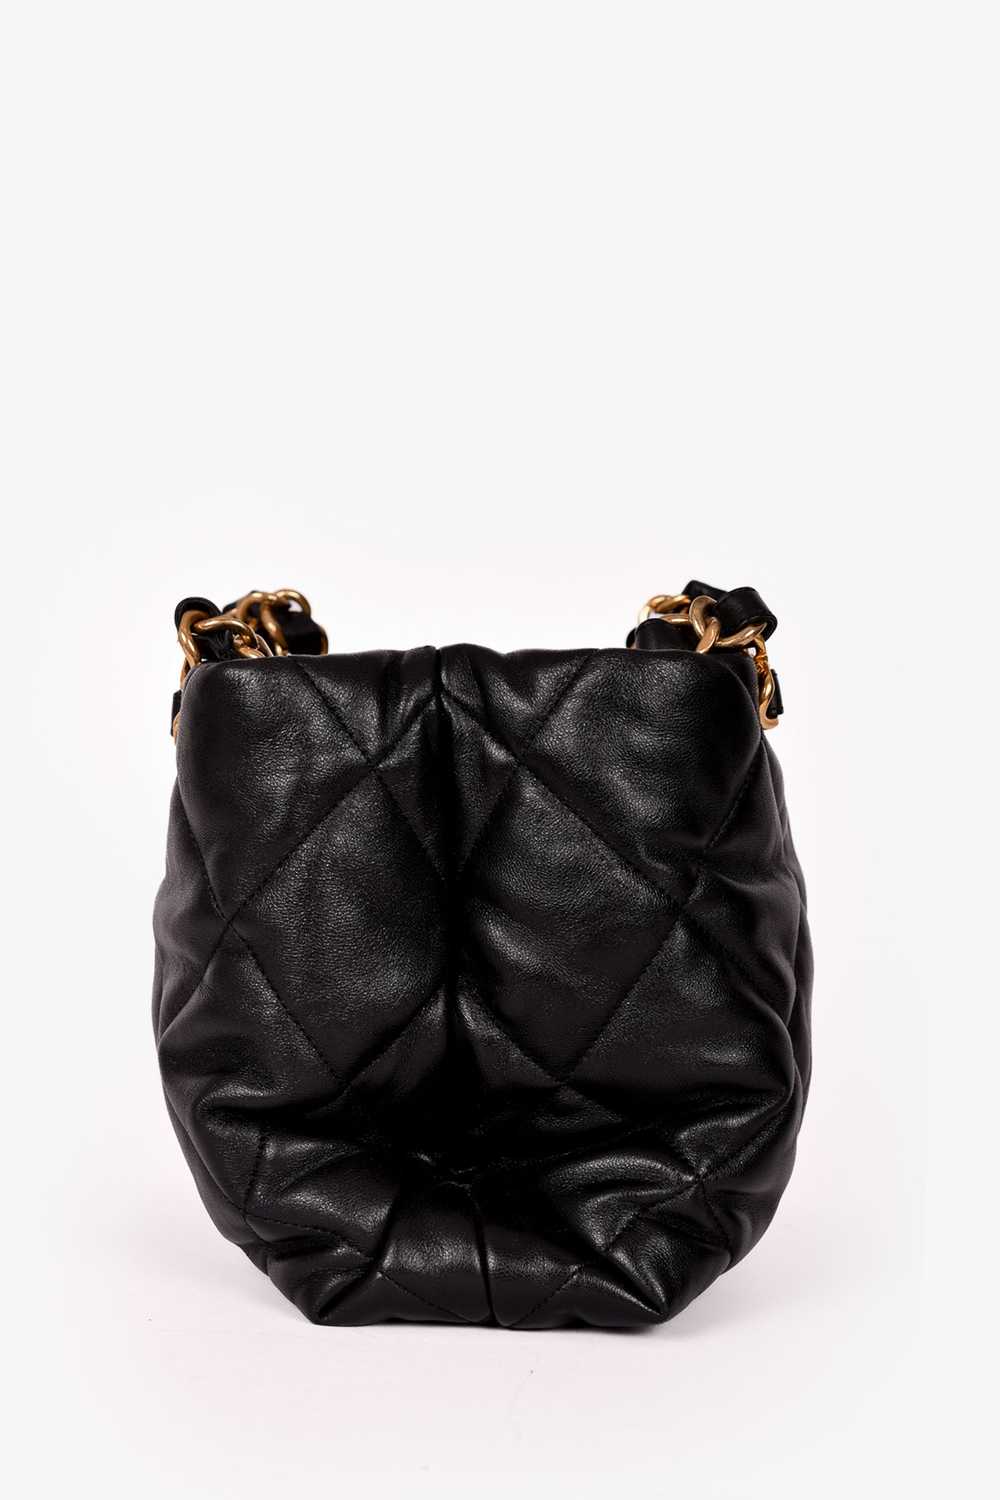 Pre-loved Chanel™ Black Lambskin Quilted Small Sh… - image 9